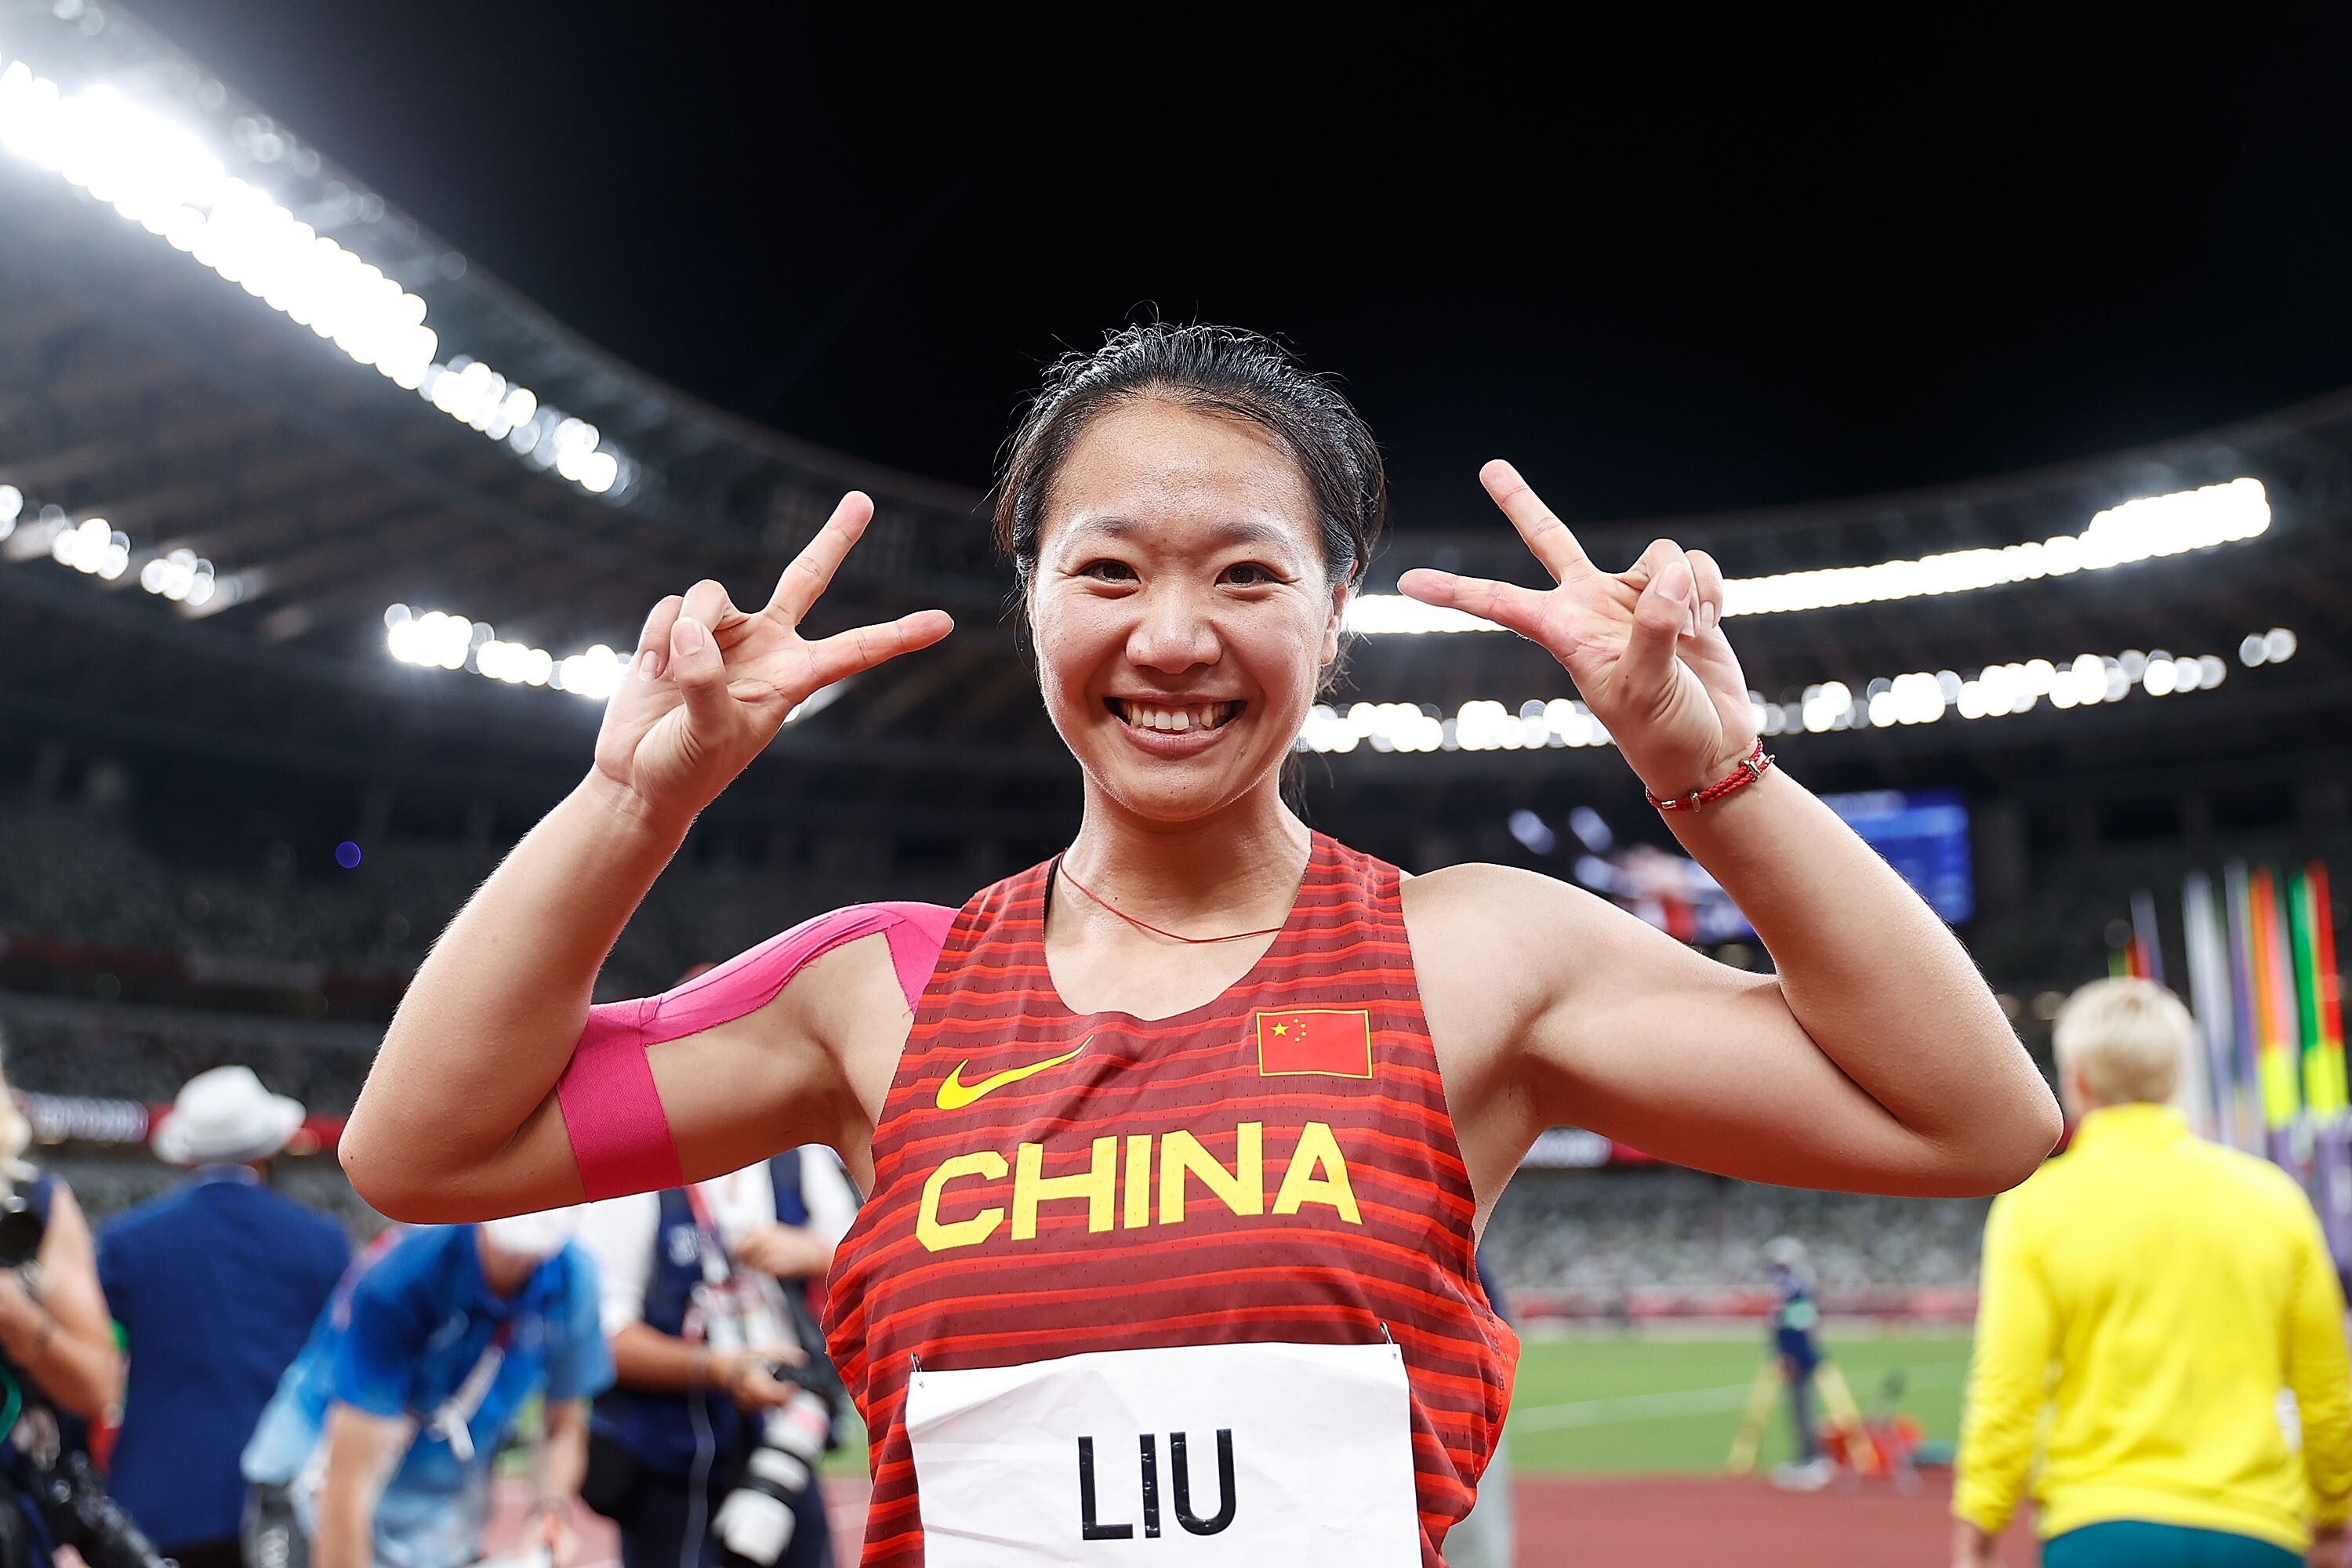 Liu Shiying of China celebrates after winning the women‘s javelin throw final at the Tokyo 2020 Olympic Games in Japan. Photo: Xinhua